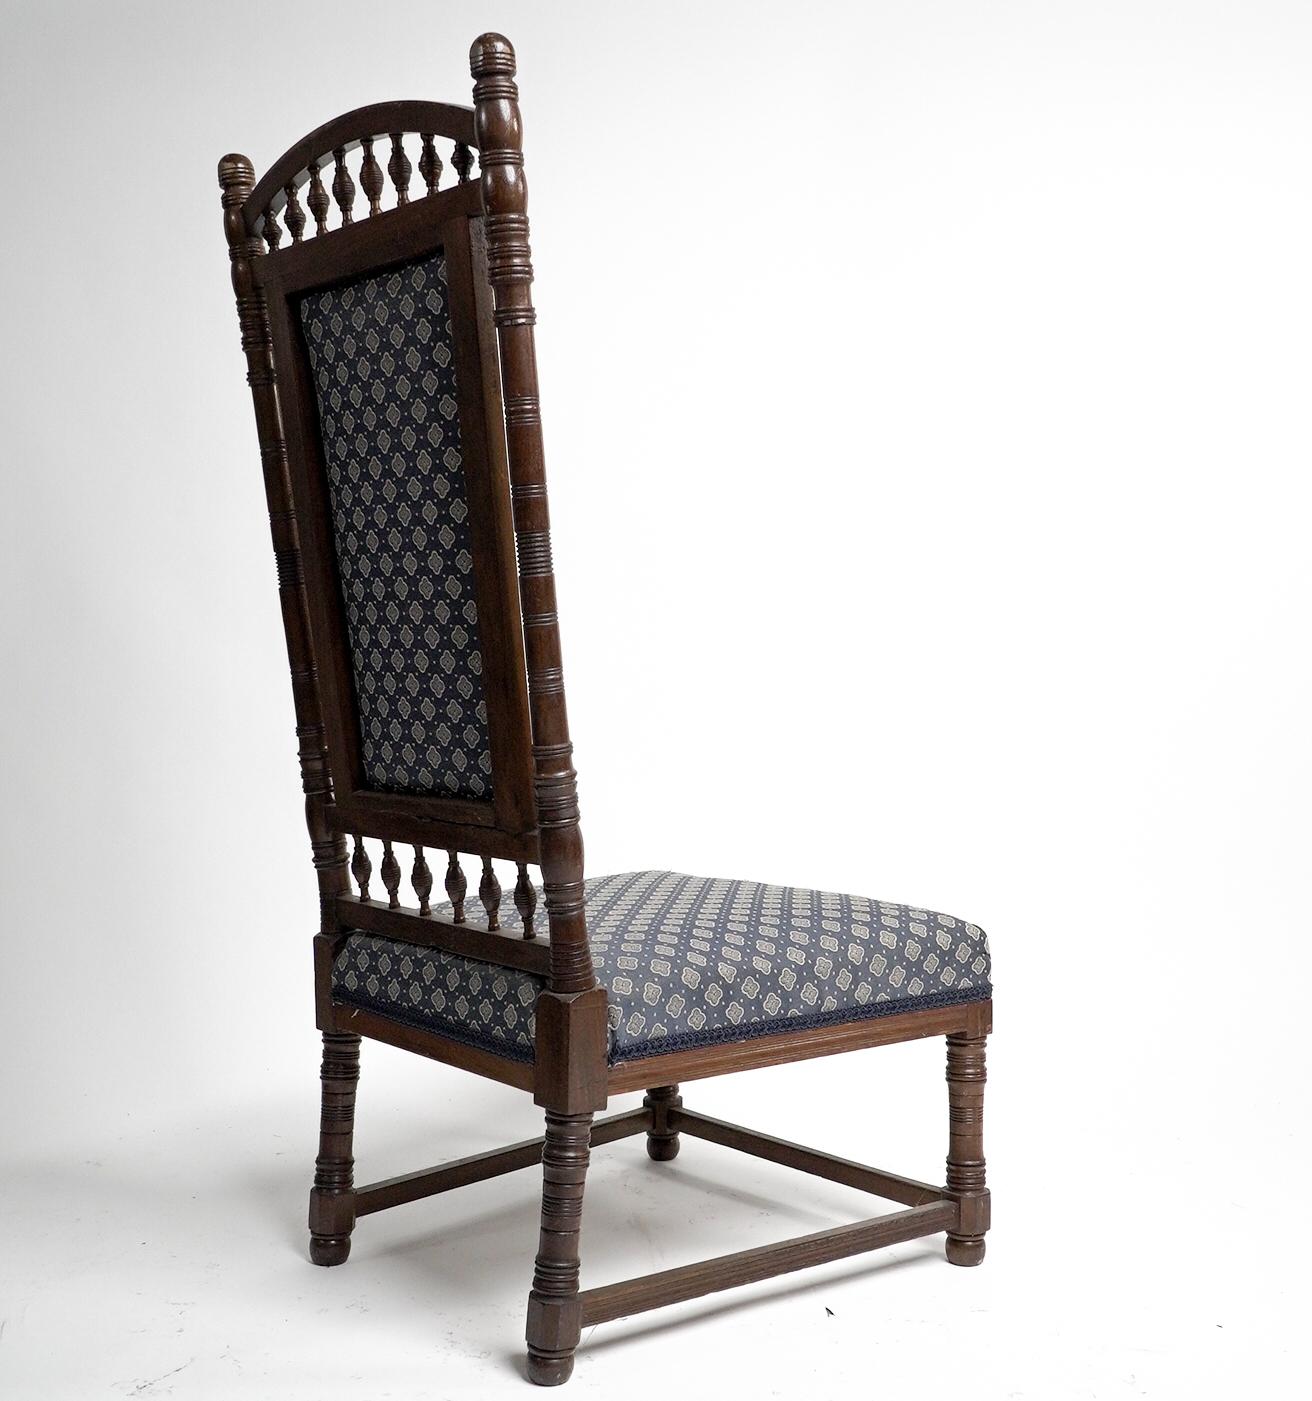 English T E Collcutt for Collinson & Lock. An Aesthetic Movement walnut high back chair. For Sale